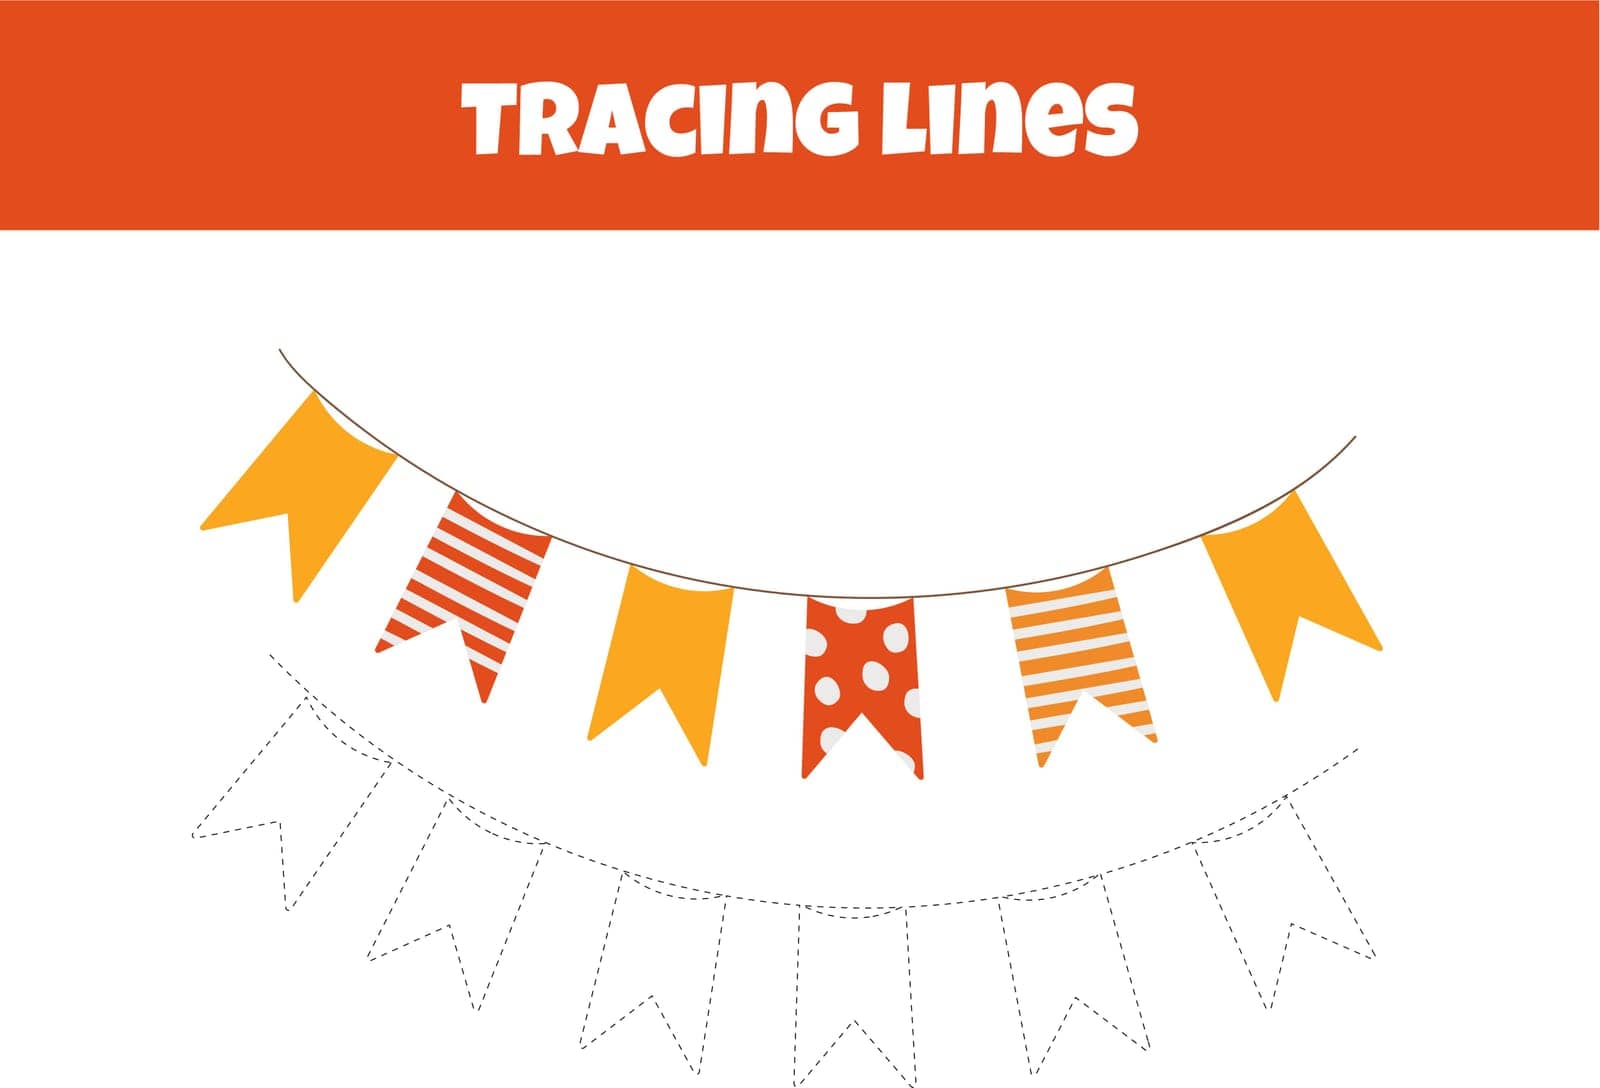 Outline The Flags On The Worksheet Designed For Preschoolers Aged 4-6 To Practice Line Tracing